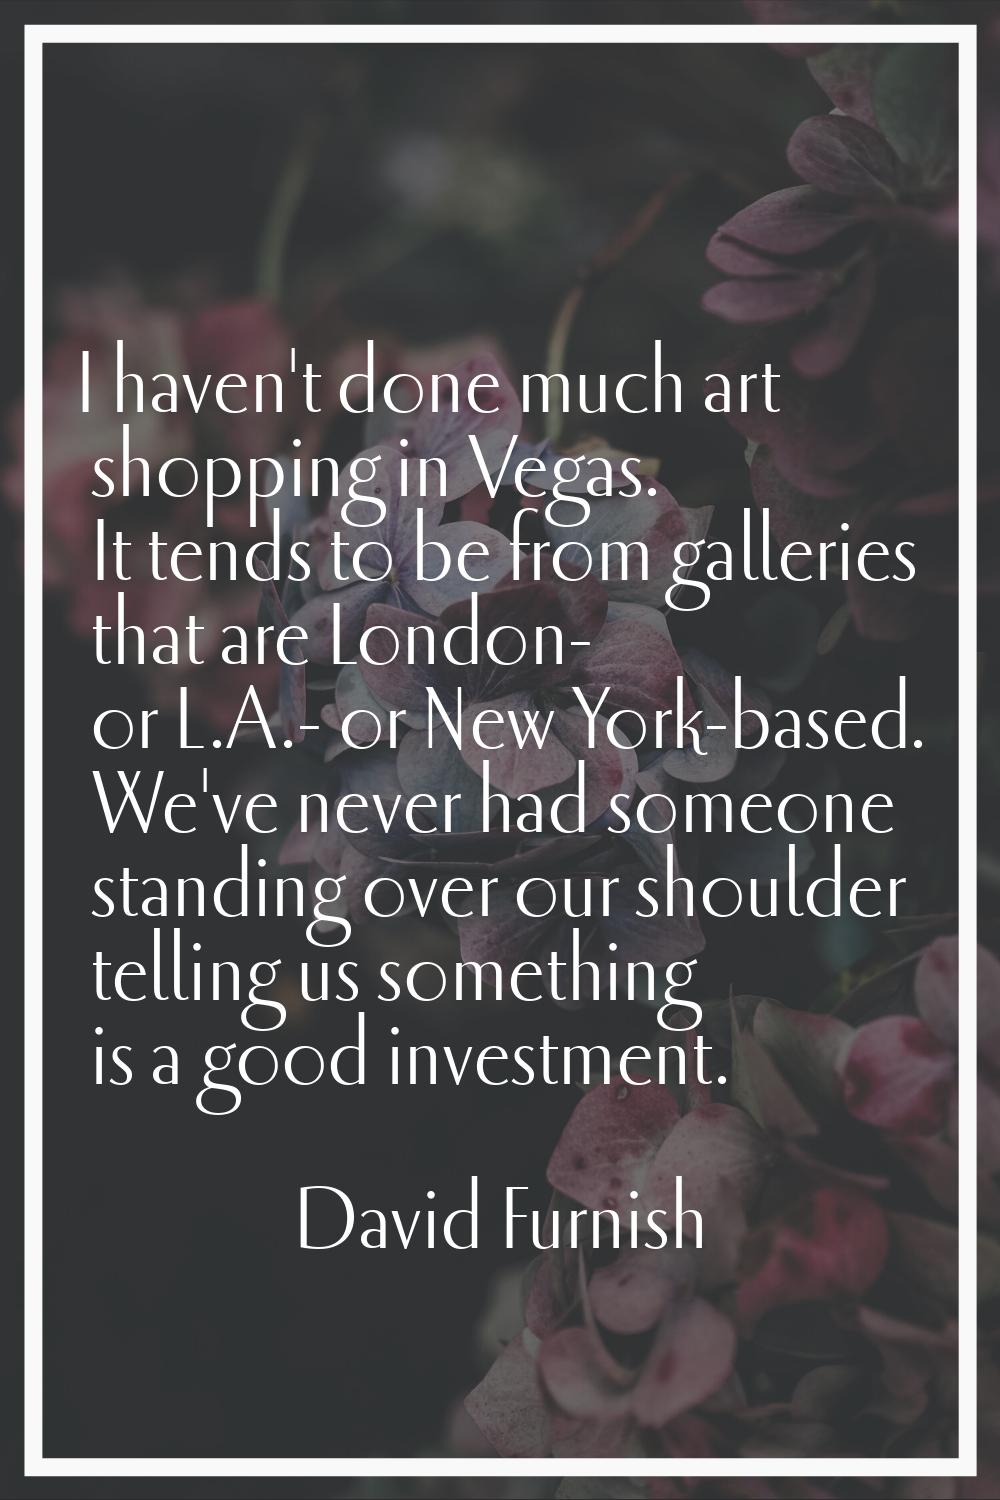 I haven't done much art shopping in Vegas. It tends to be from galleries that are London- or L.A.- 